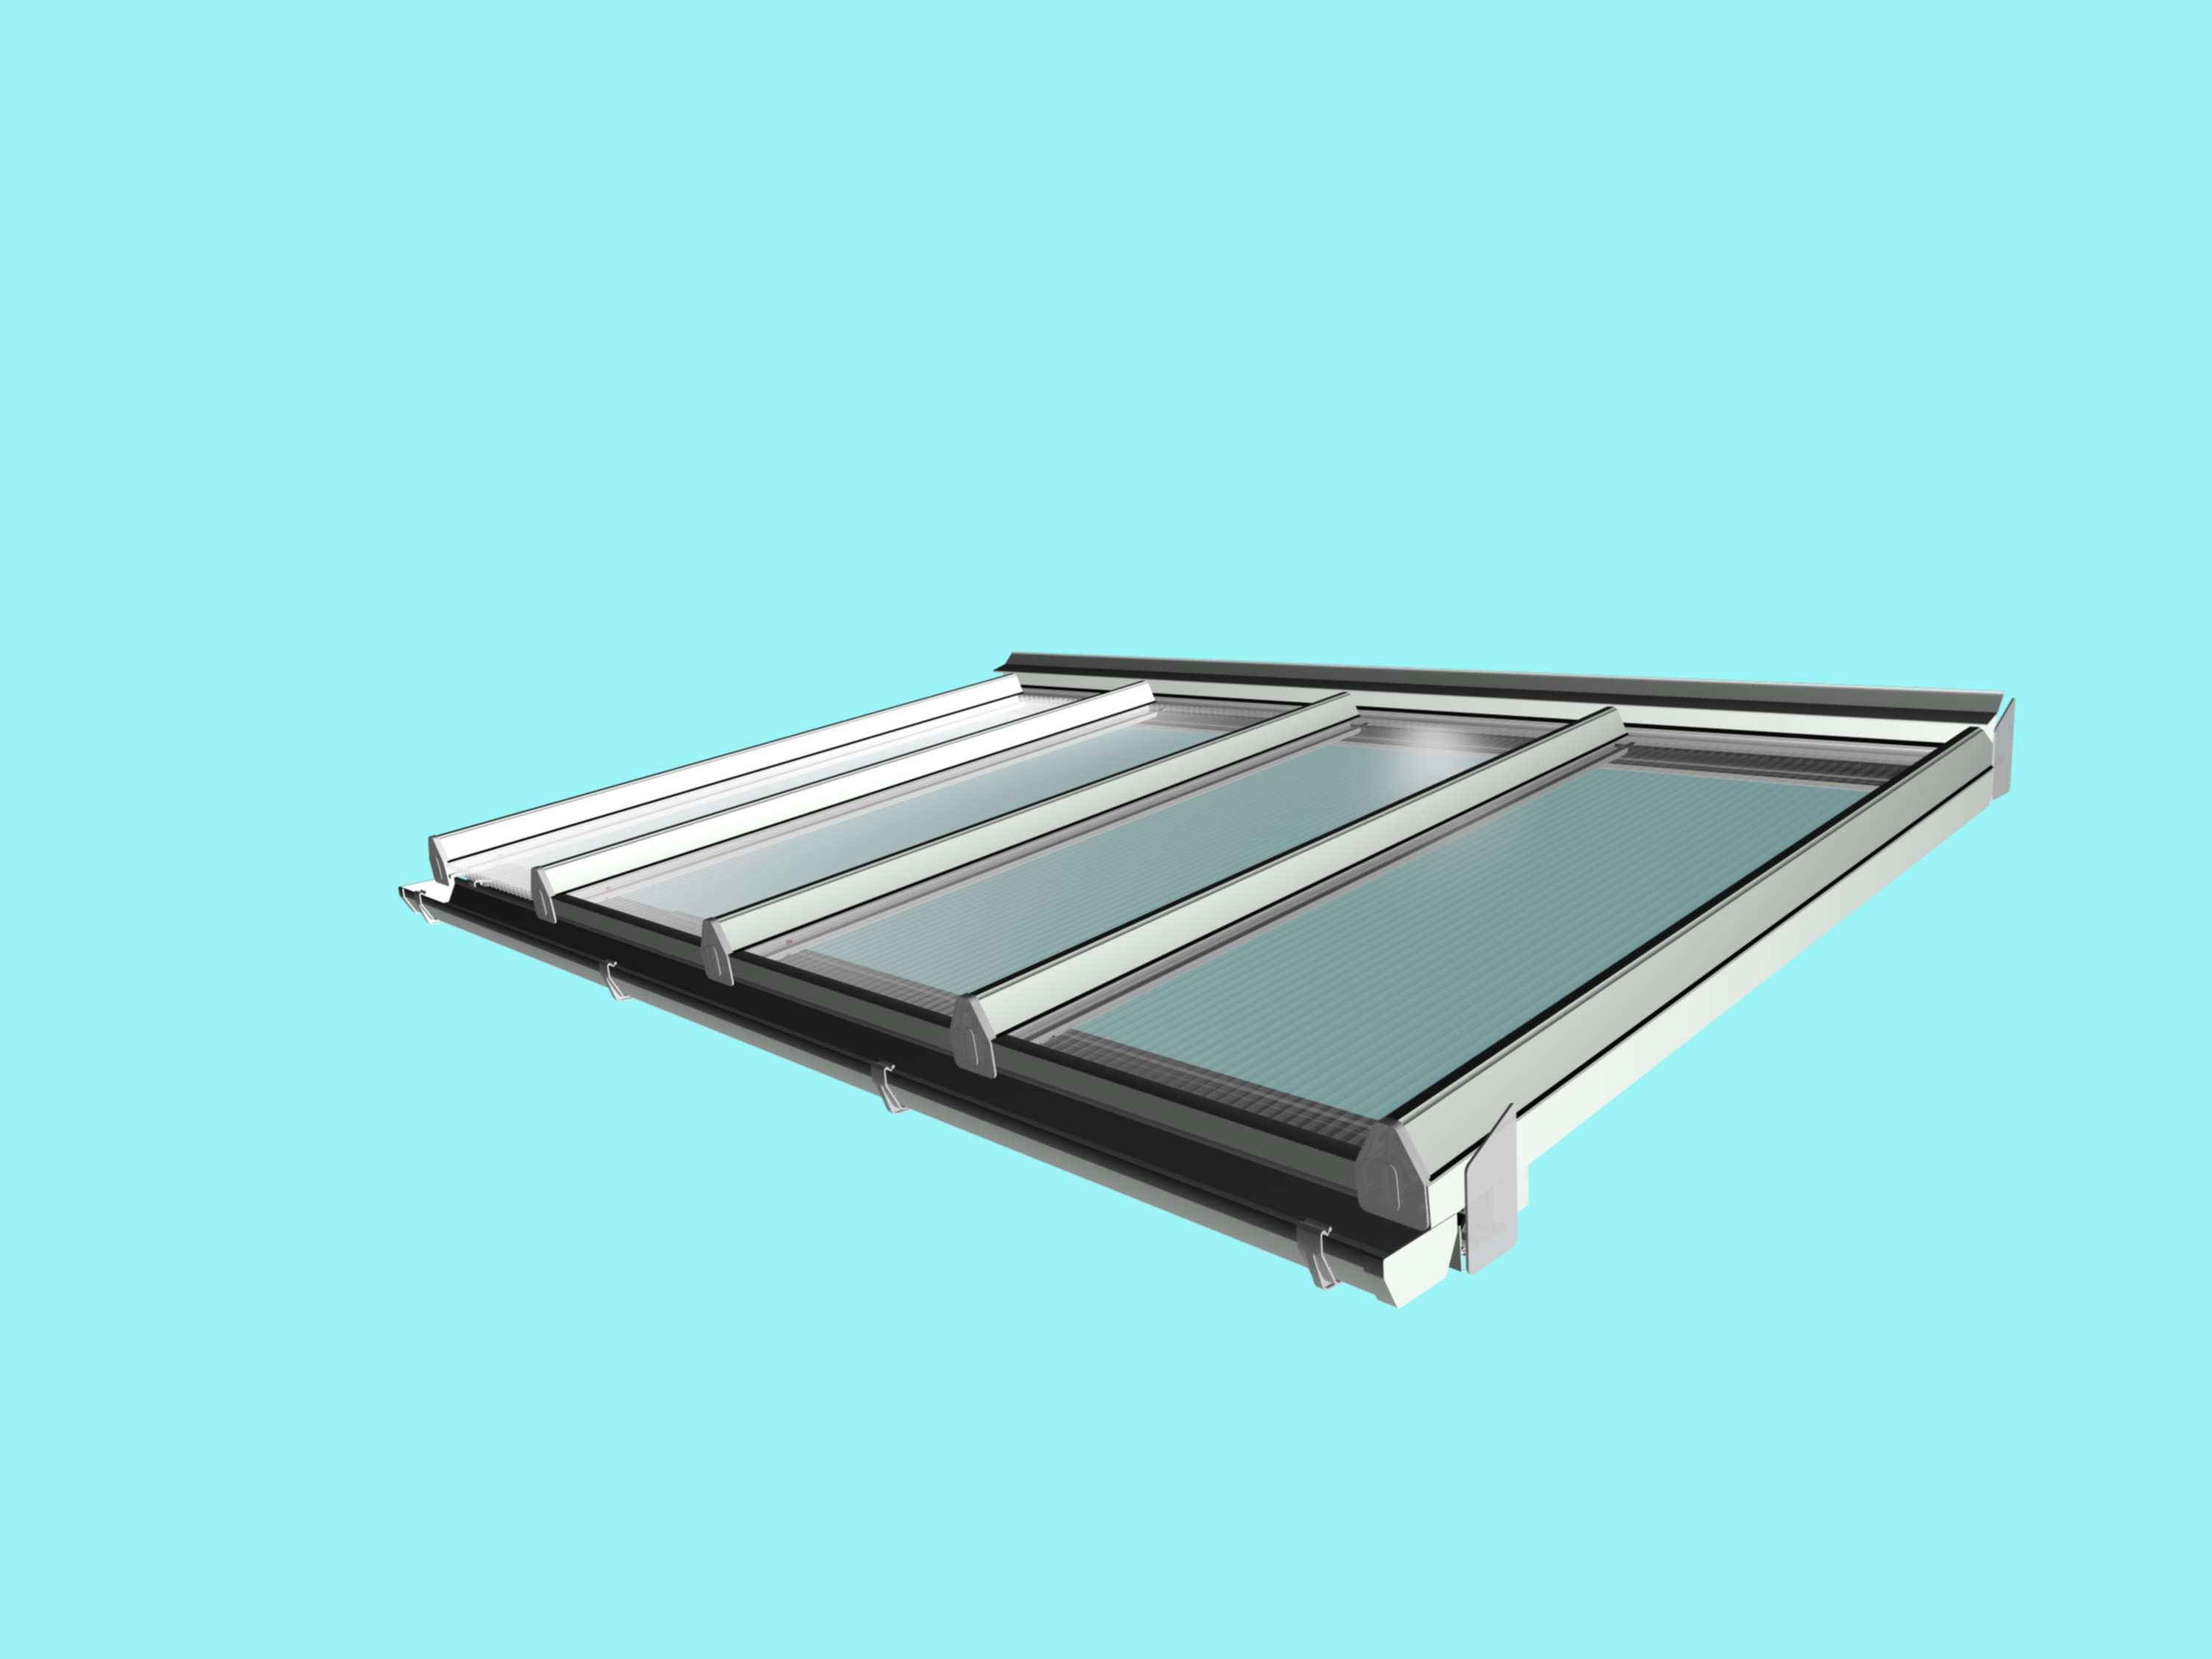 Self-Supporting DIY Conservatory Roof Kit for 25mm polycarbonate, 6.0m wide x 3.5m Projection from Omega Build